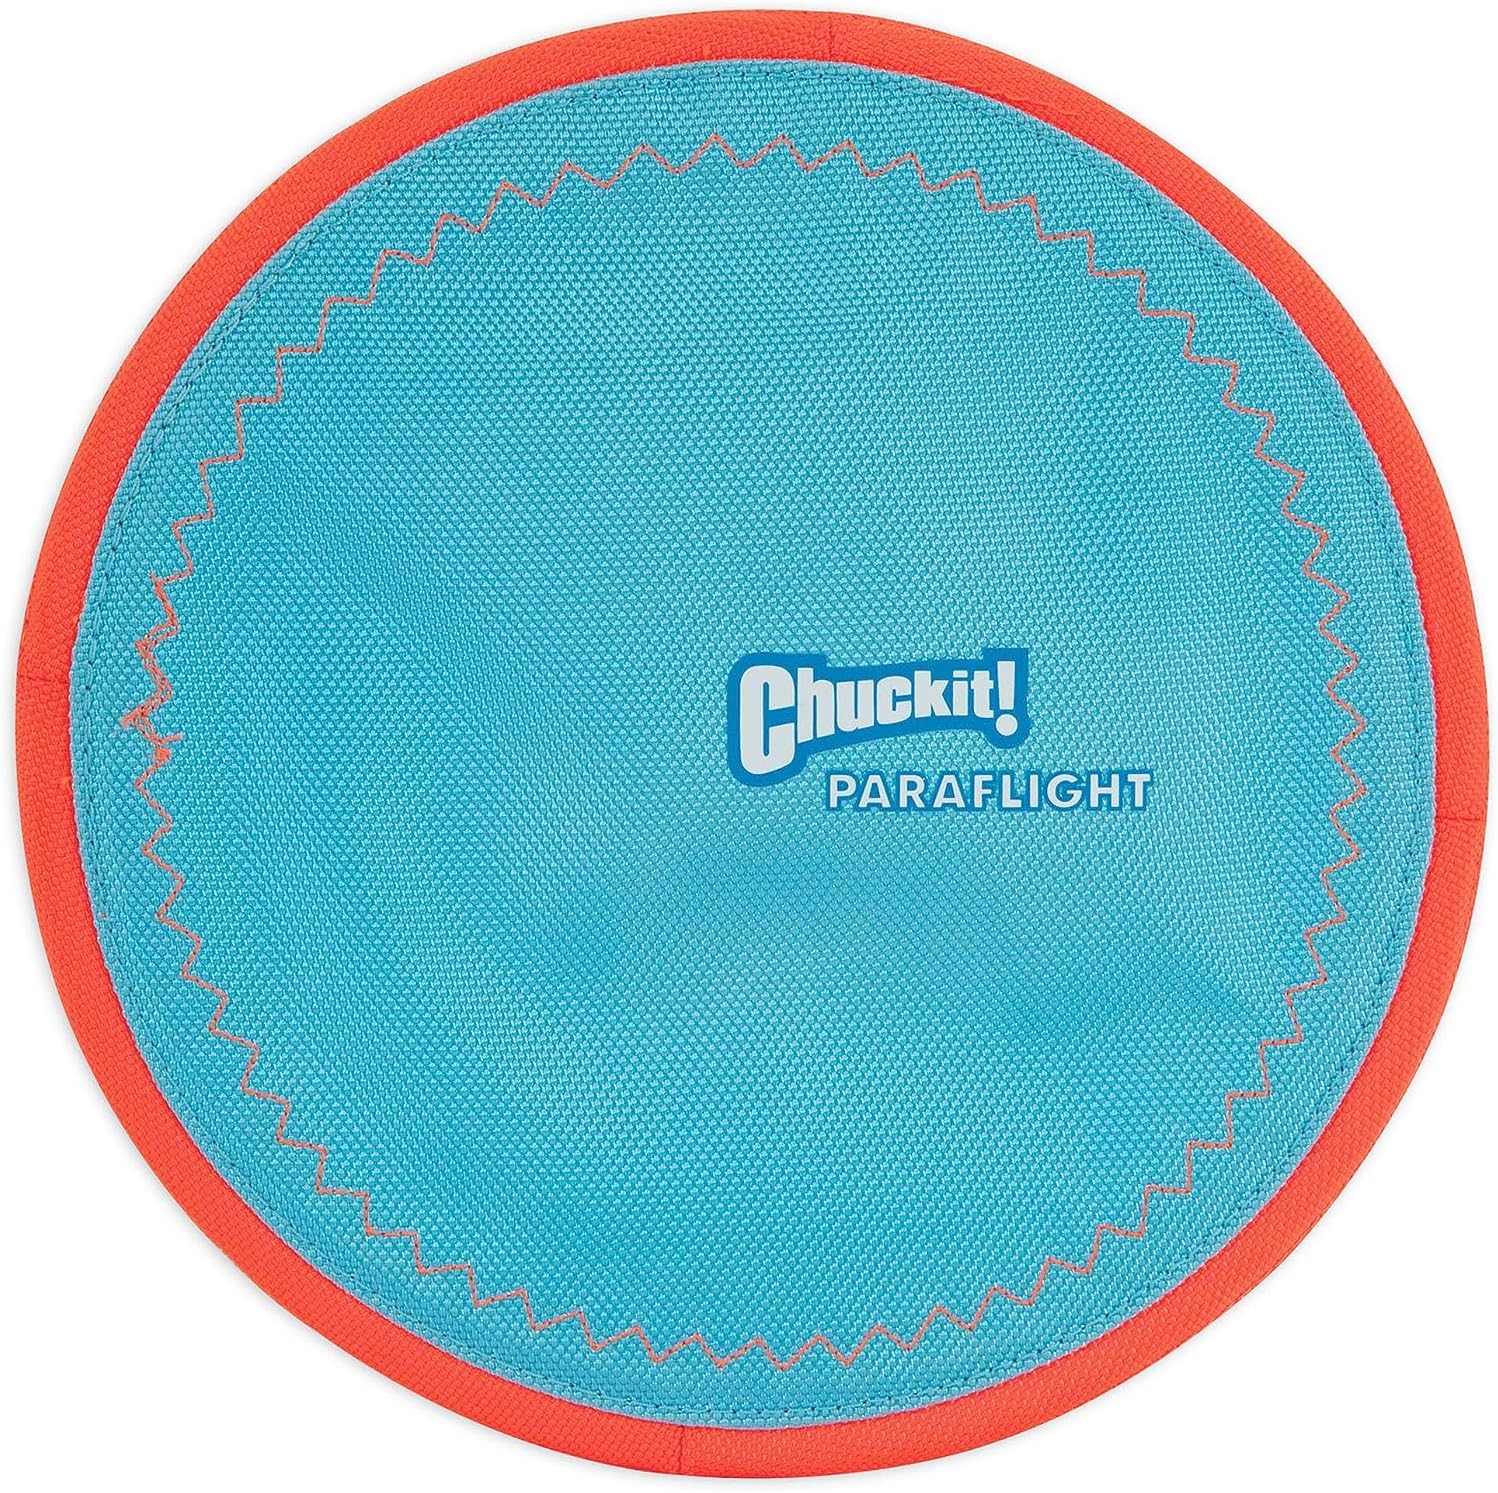 This is a super training frisbee for your dog or puppy to learn on without making a mistake and knocking their teeth out. My GSD loves to chase her frisbee but was nervous to attack it. So a few tosses with this and she chomped it! I made a motion of my hands like a Pac-Man and clomped it while tossing it straight up (not like a frisbee yet) with a spin in the air and she seems to understand. She sniffed and watched it blink I to trees and after three shots shes caught it! She was very proud 